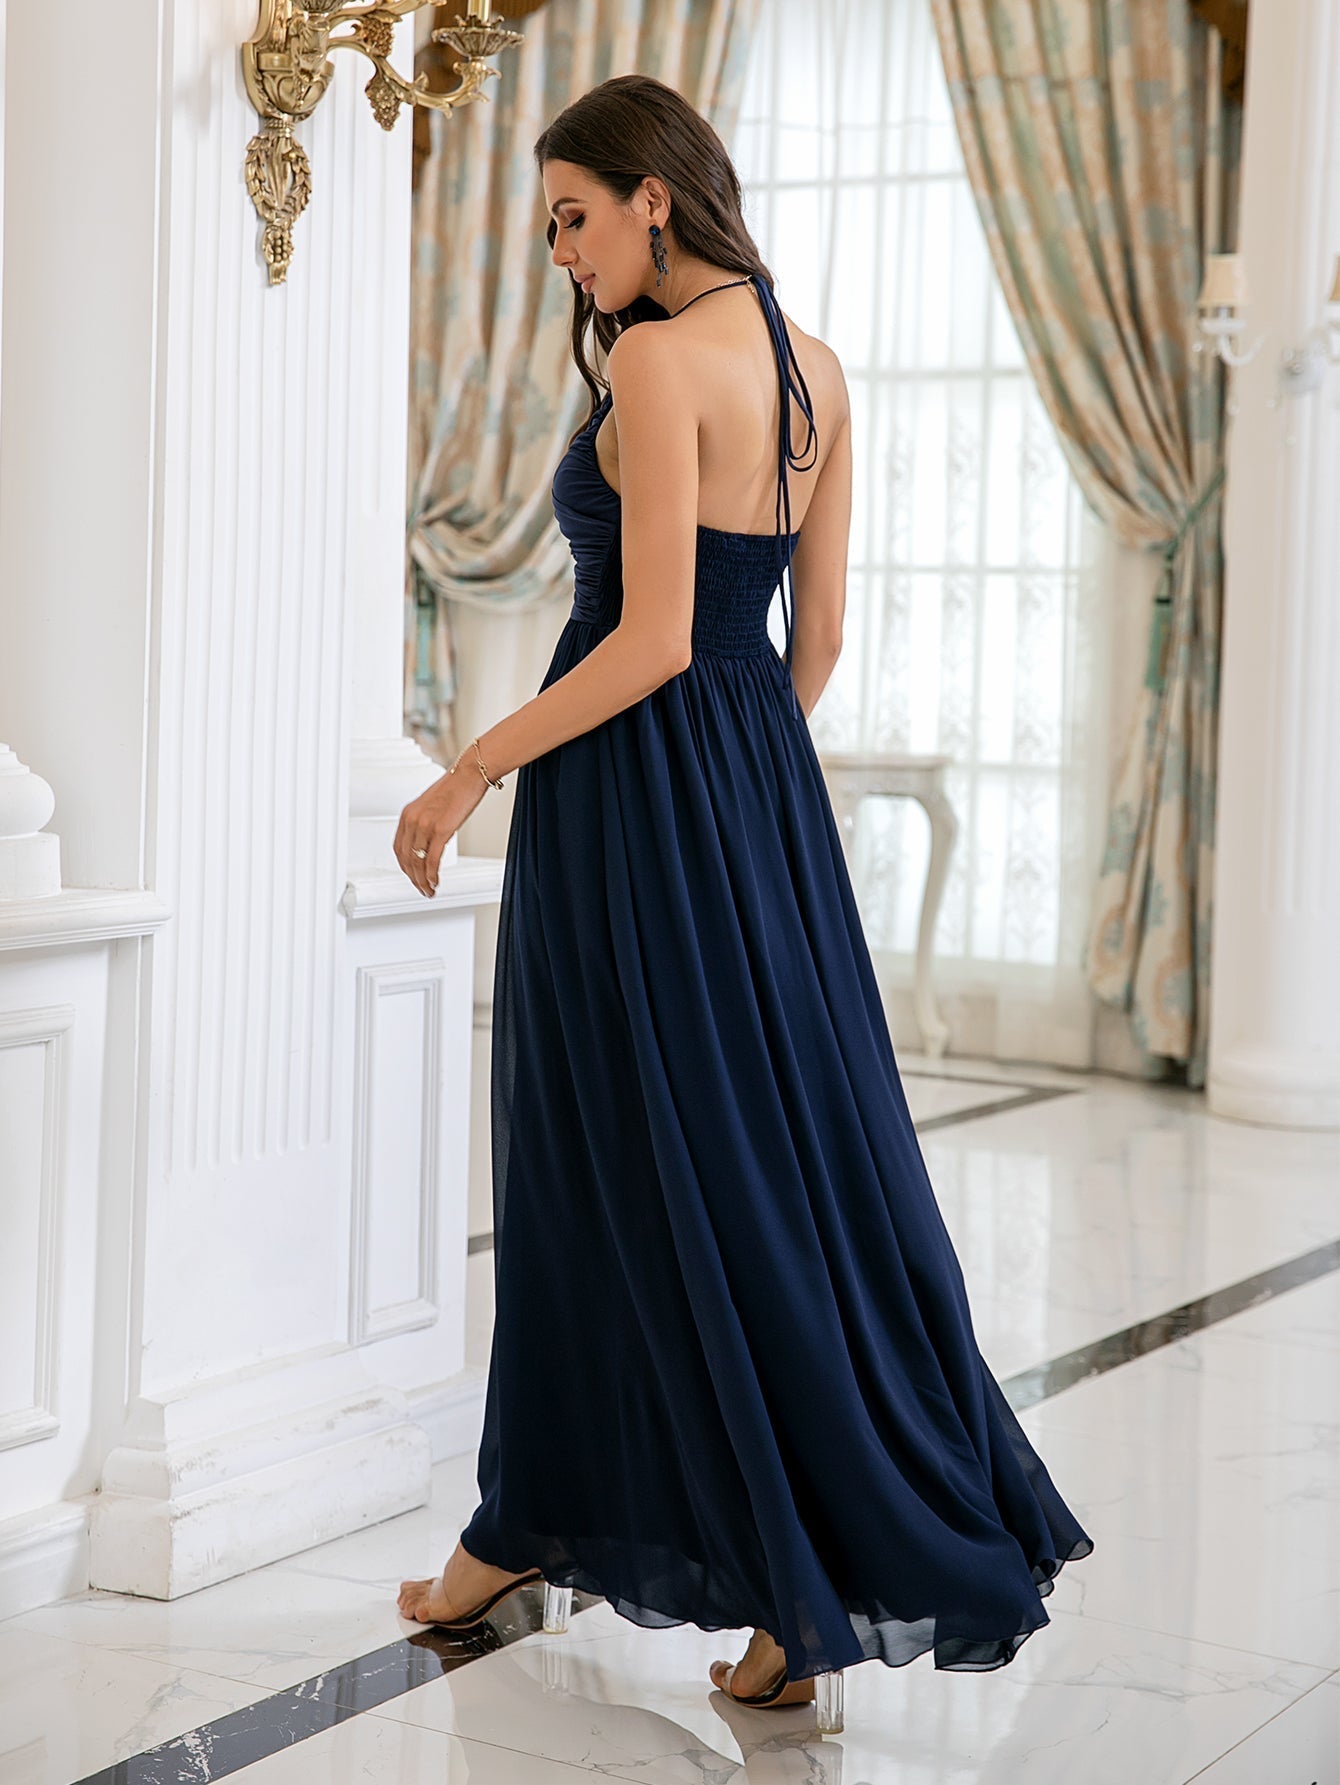 Navy A line Party Dress